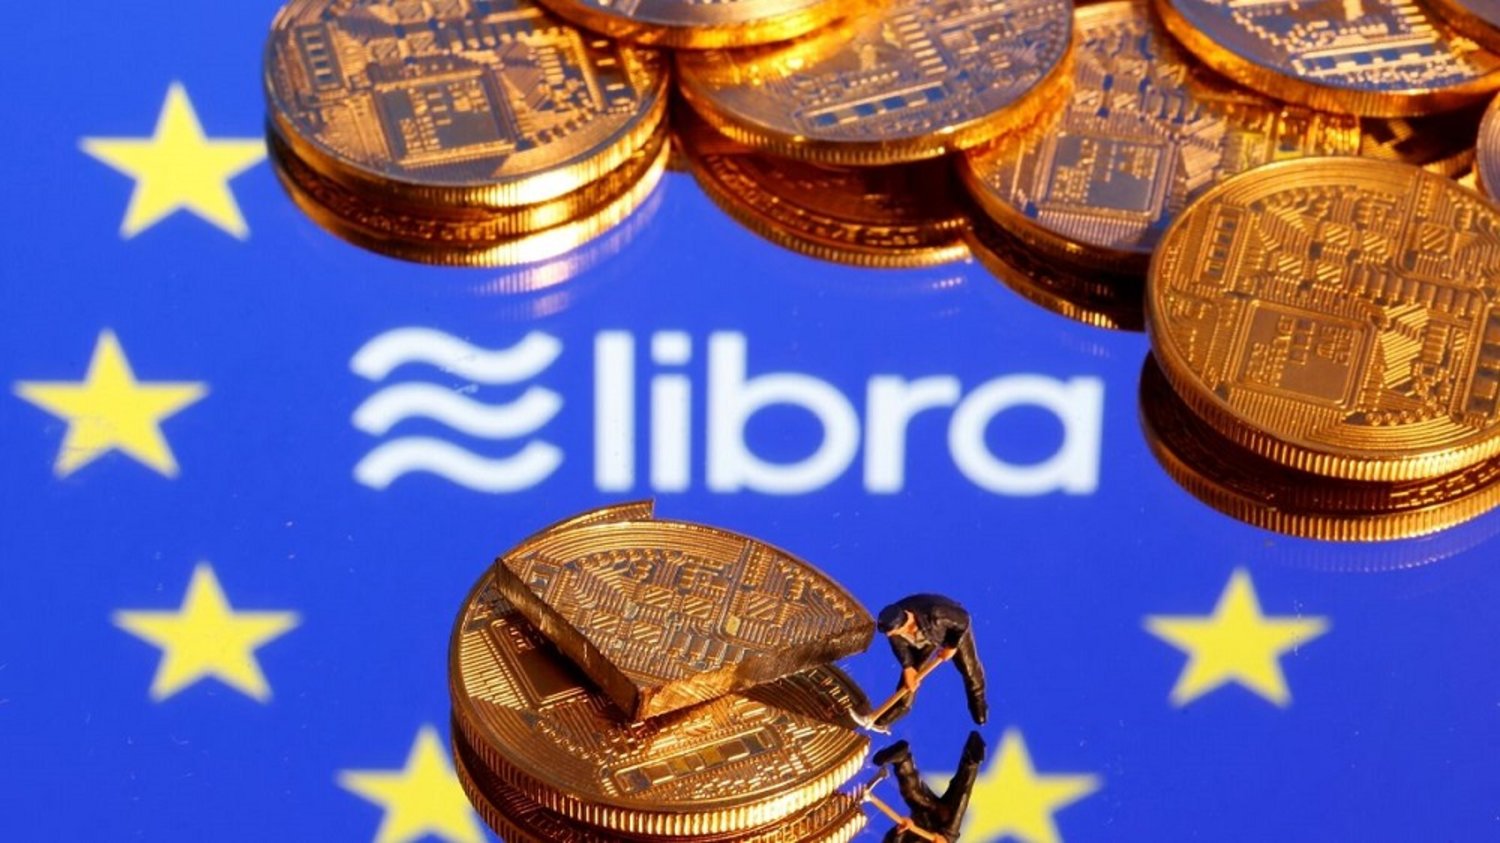 Facebook's cryptocurrency, Libra, on track for launch in | Mint